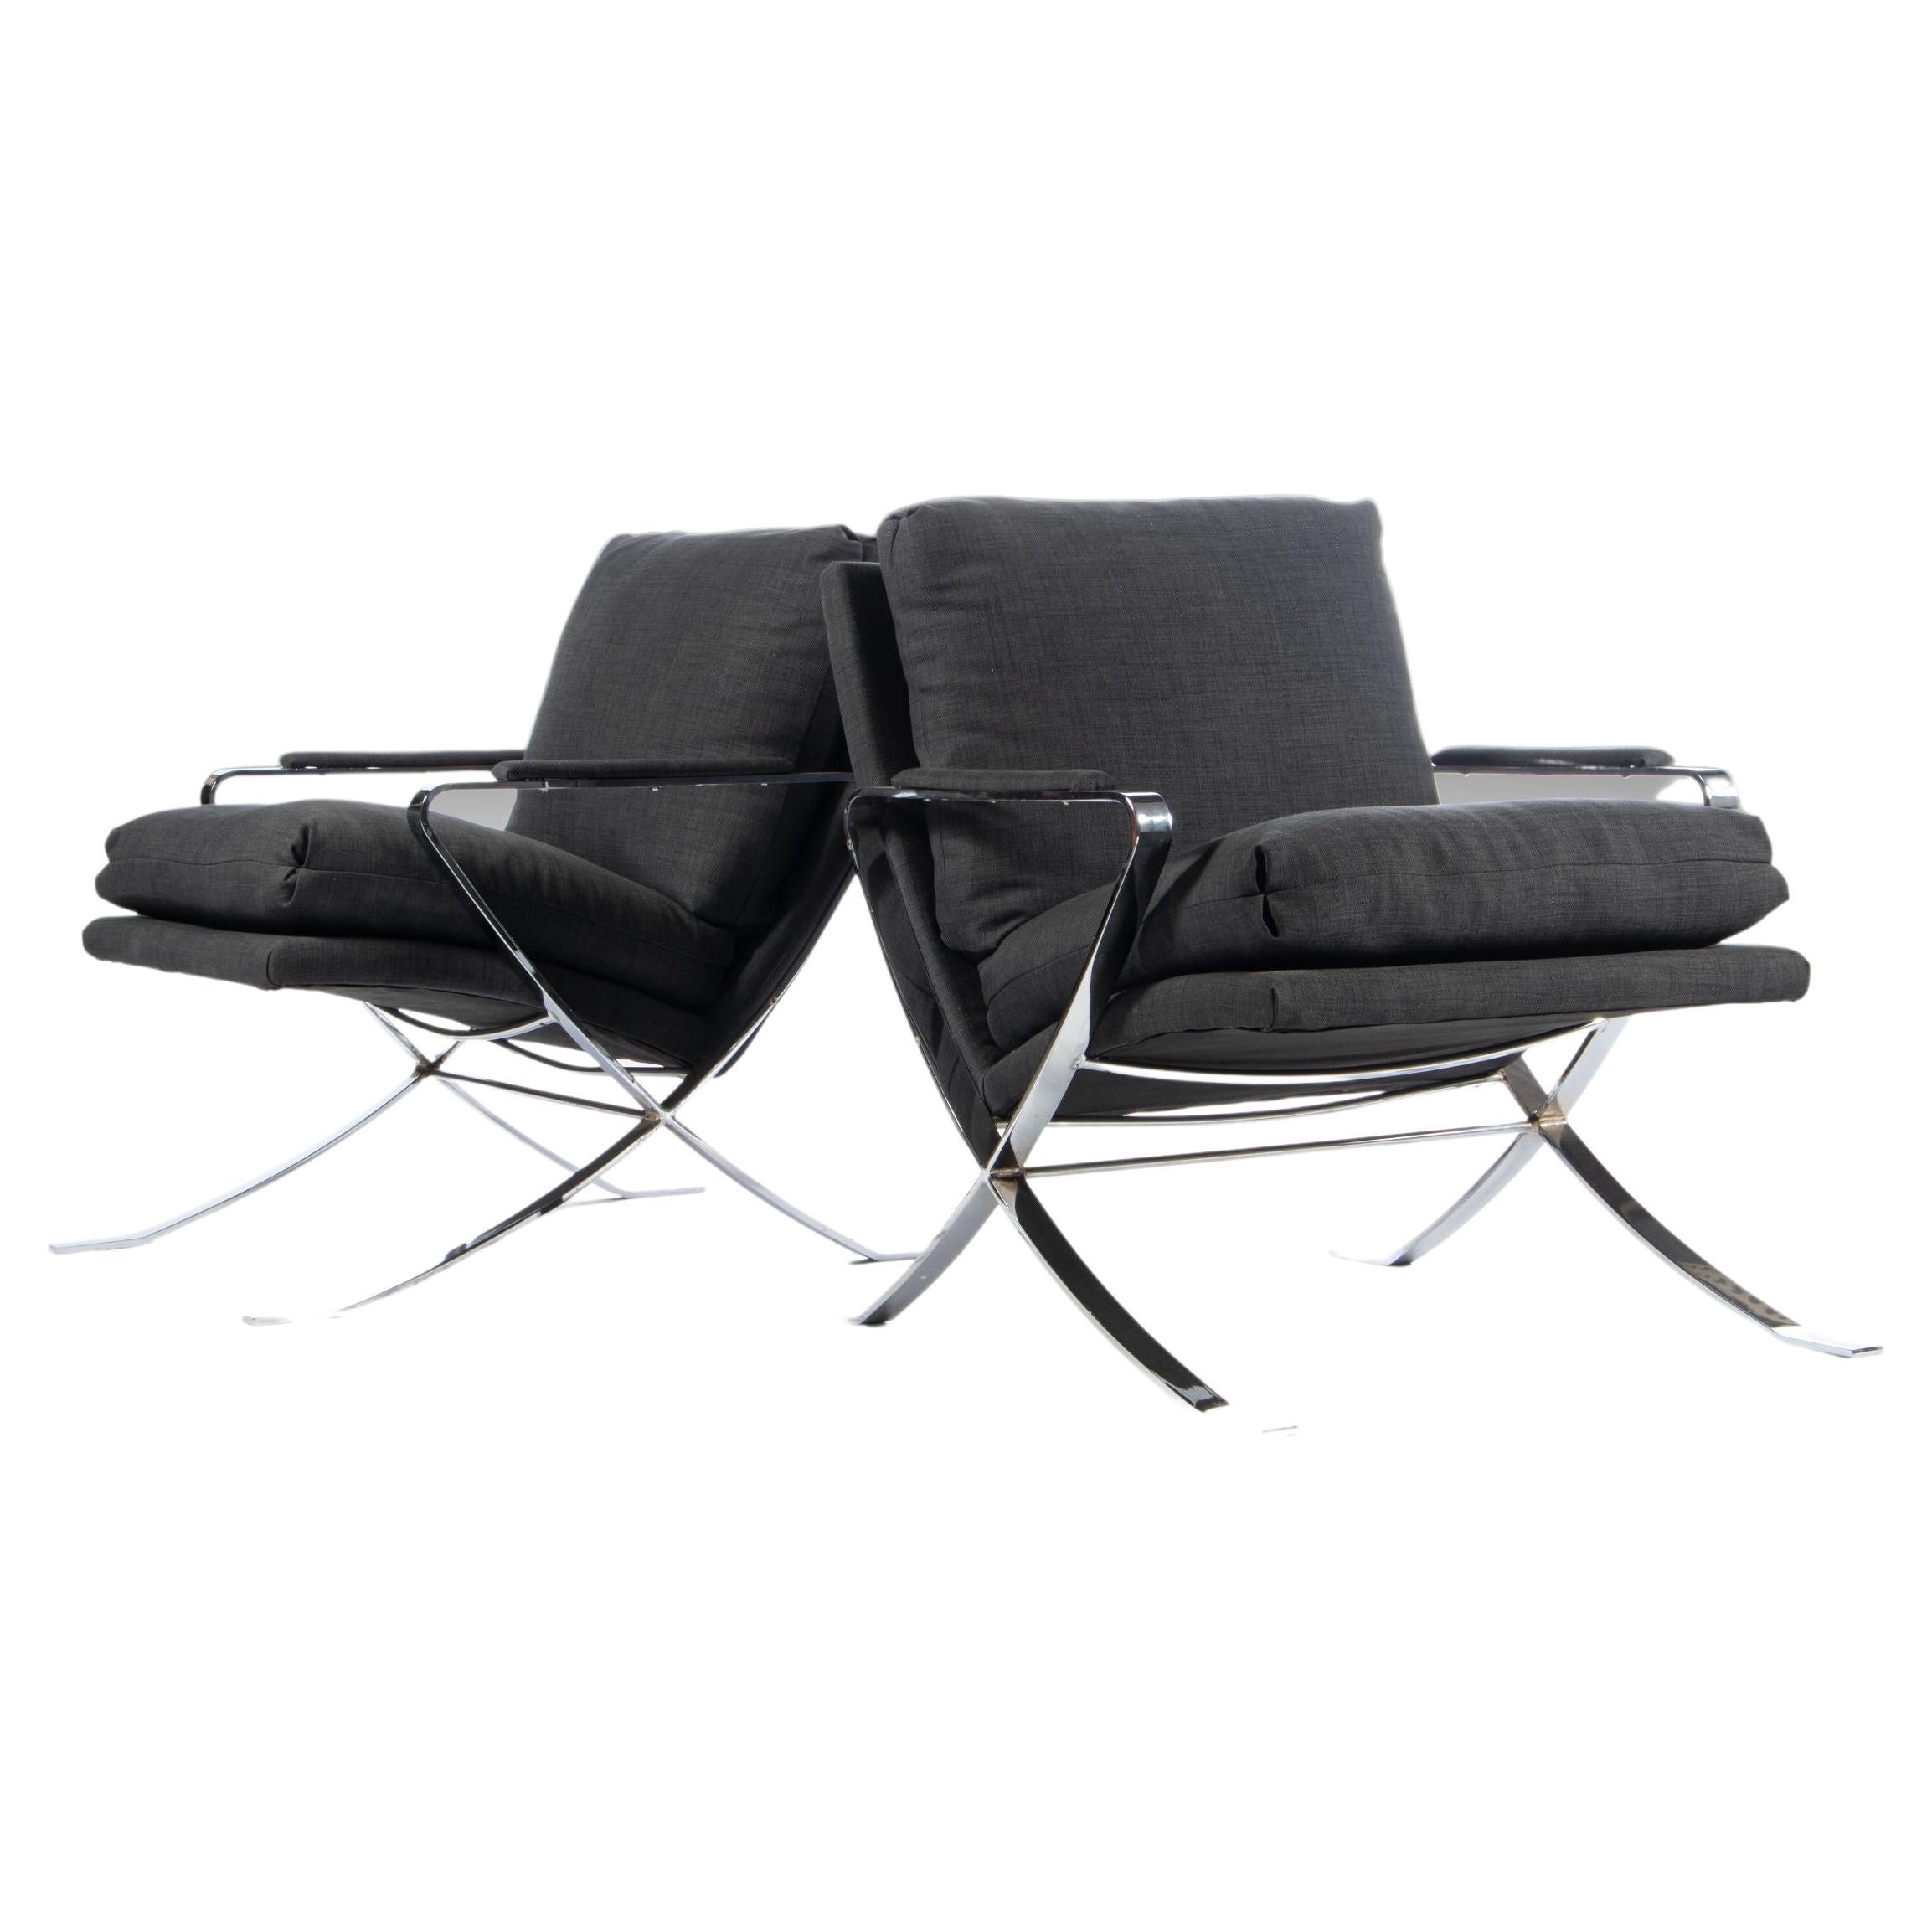 Set of Two (2) Flair Lounge Chairs by Bernhardt Flair in Chrome, USA, c. 1970's For Sale